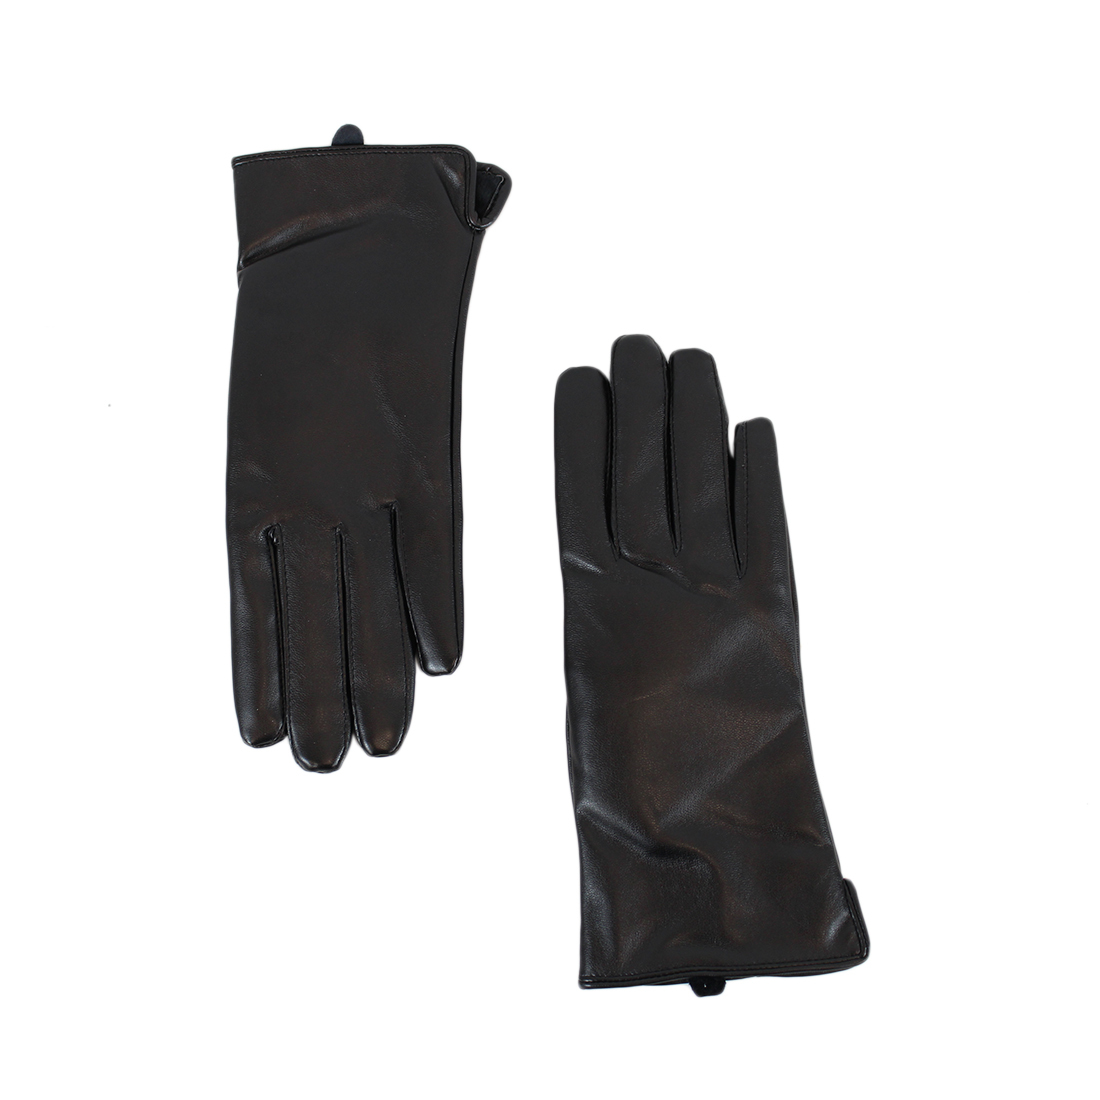 * Plain leather gloves with lining